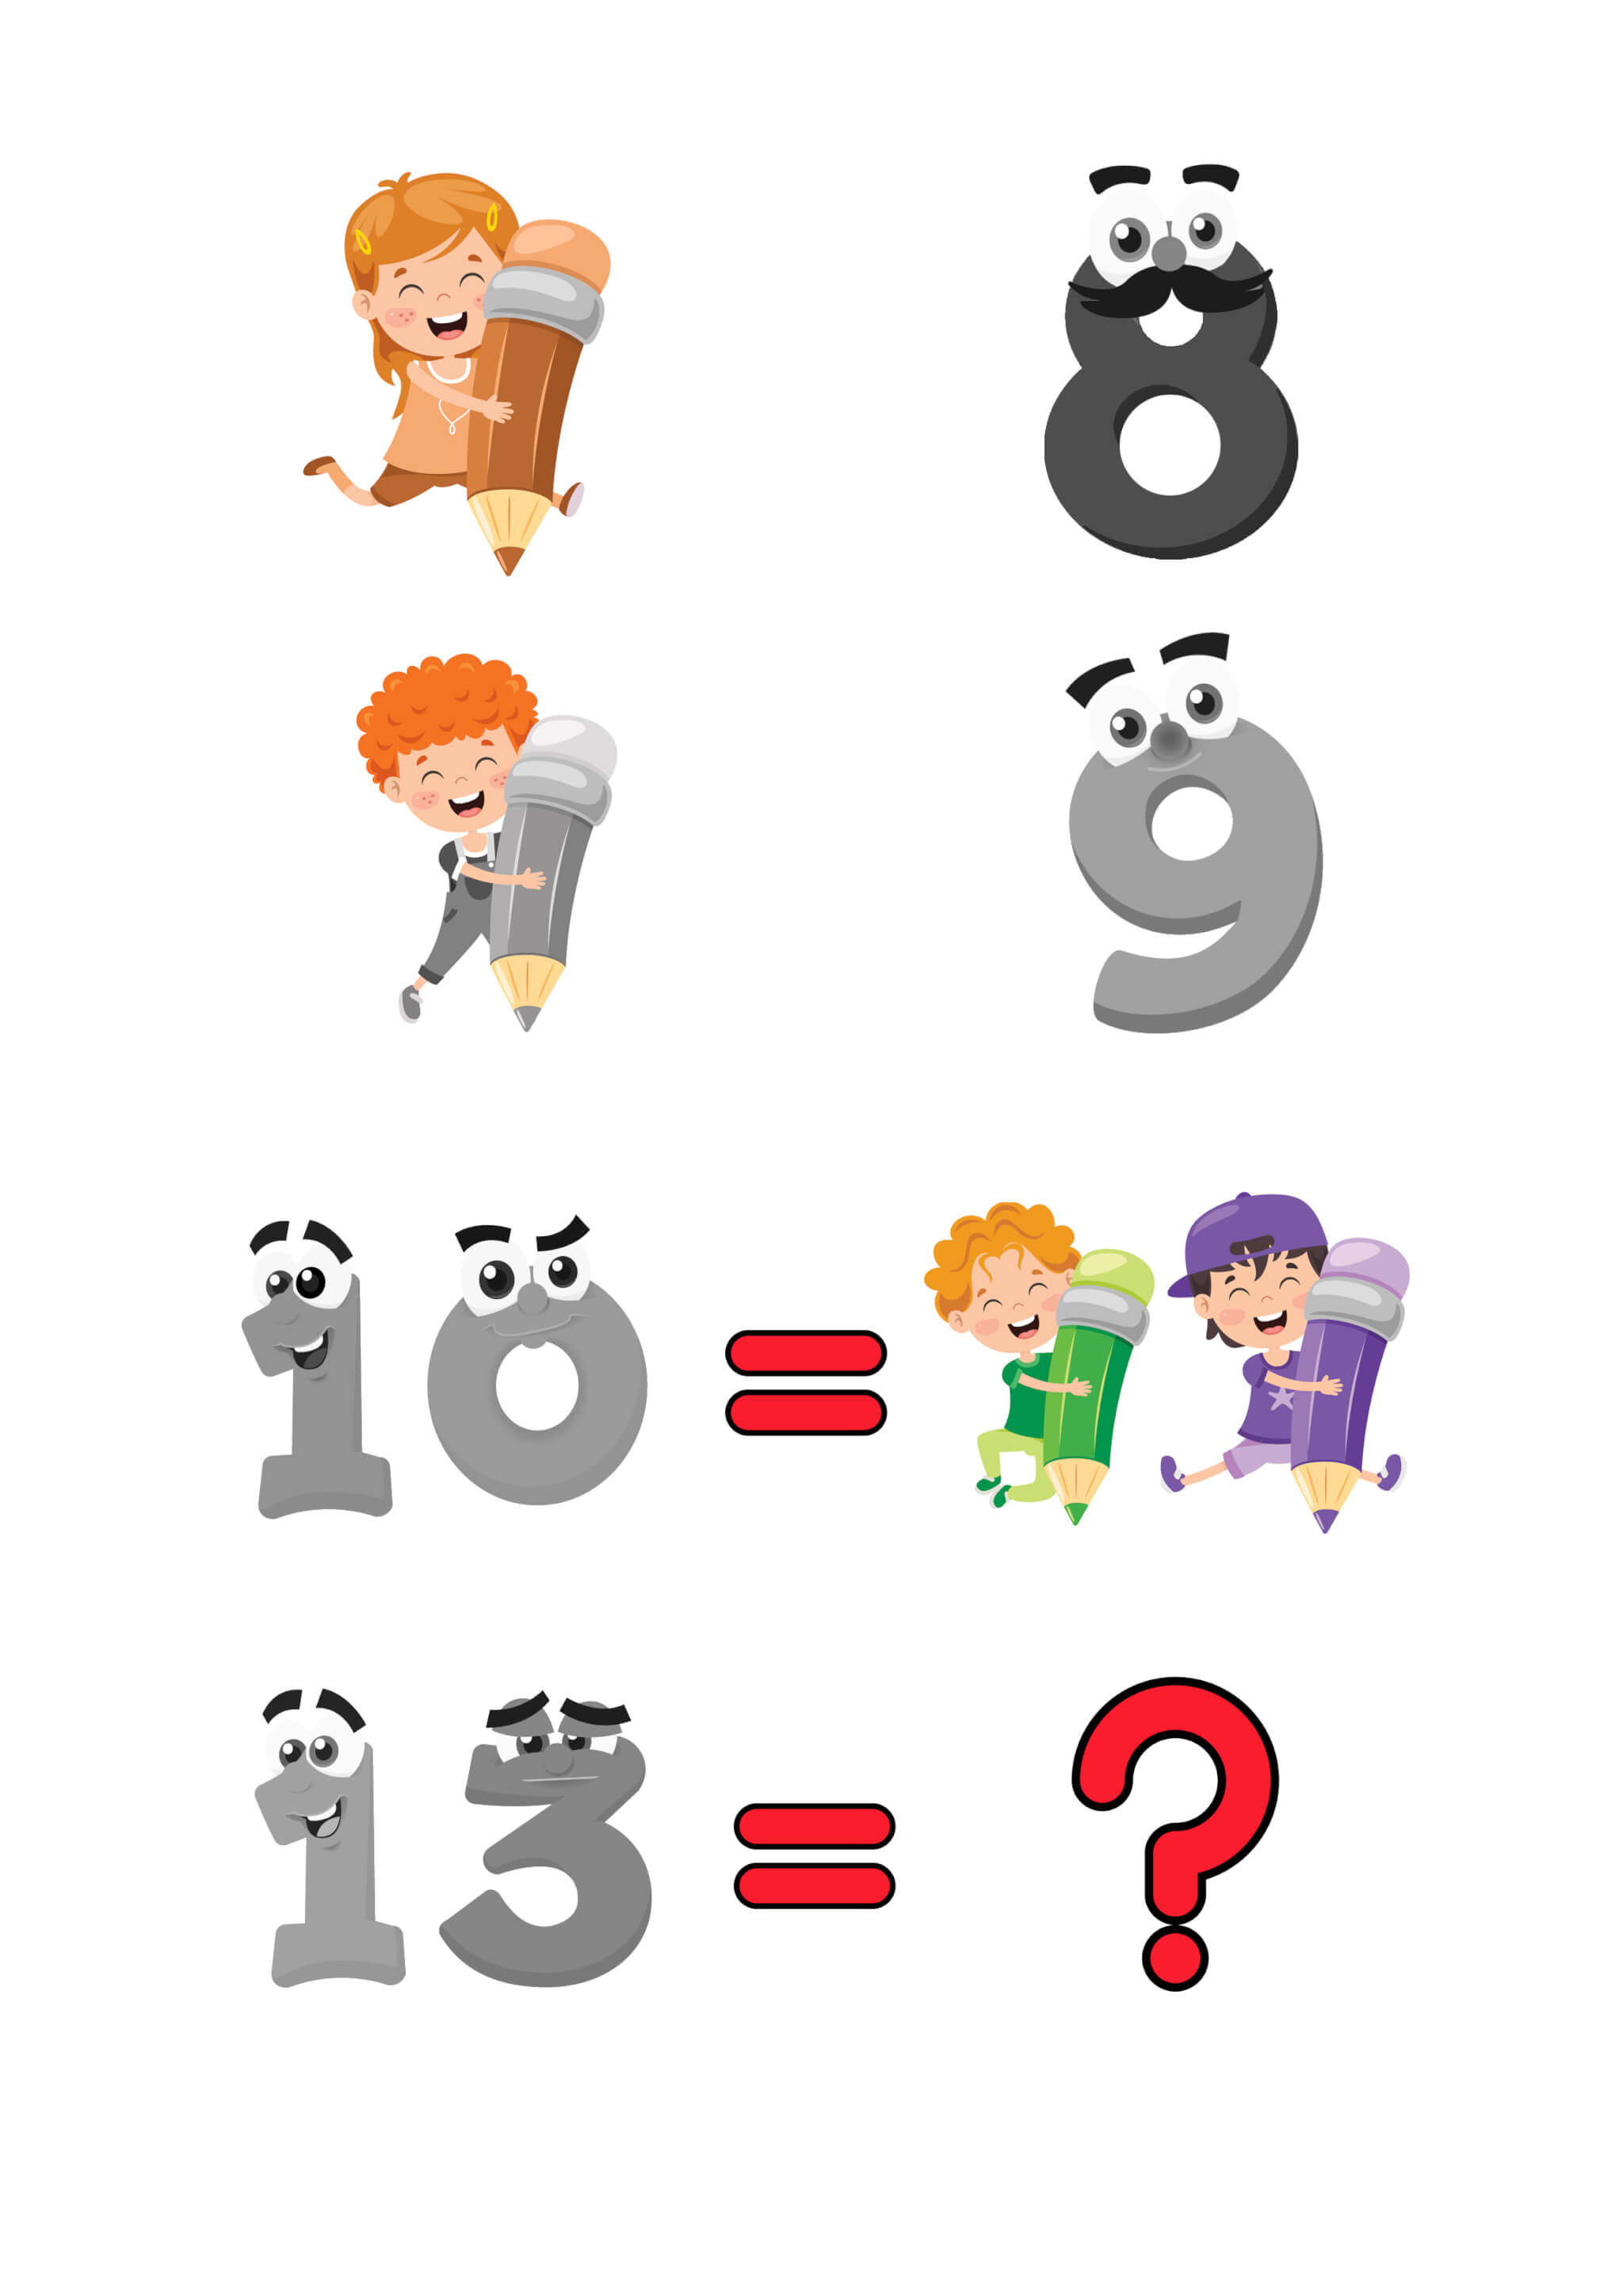 Fun Math Worksheet for Studying Numbers - Image 7